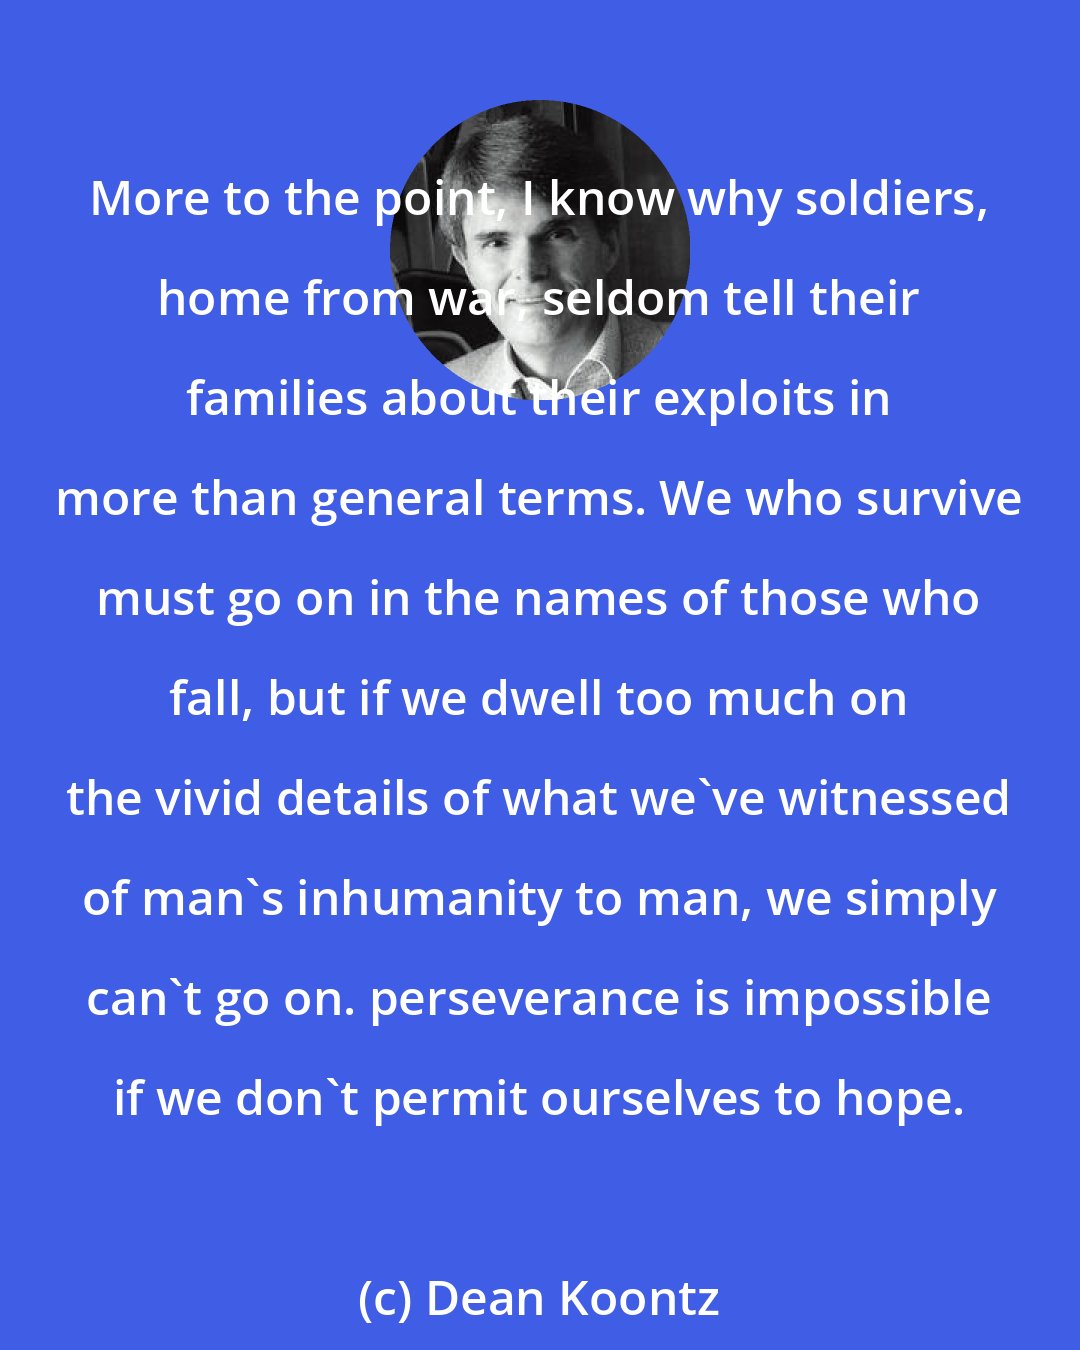 Dean Koontz: More to the point, I know why soldiers, home from war, seldom tell their families about their exploits in more than general terms. We who survive must go on in the names of those who fall, but if we dwell too much on the vivid details of what we've witnessed of man's inhumanity to man, we simply can't go on. perseverance is impossible if we don't permit ourselves to hope.